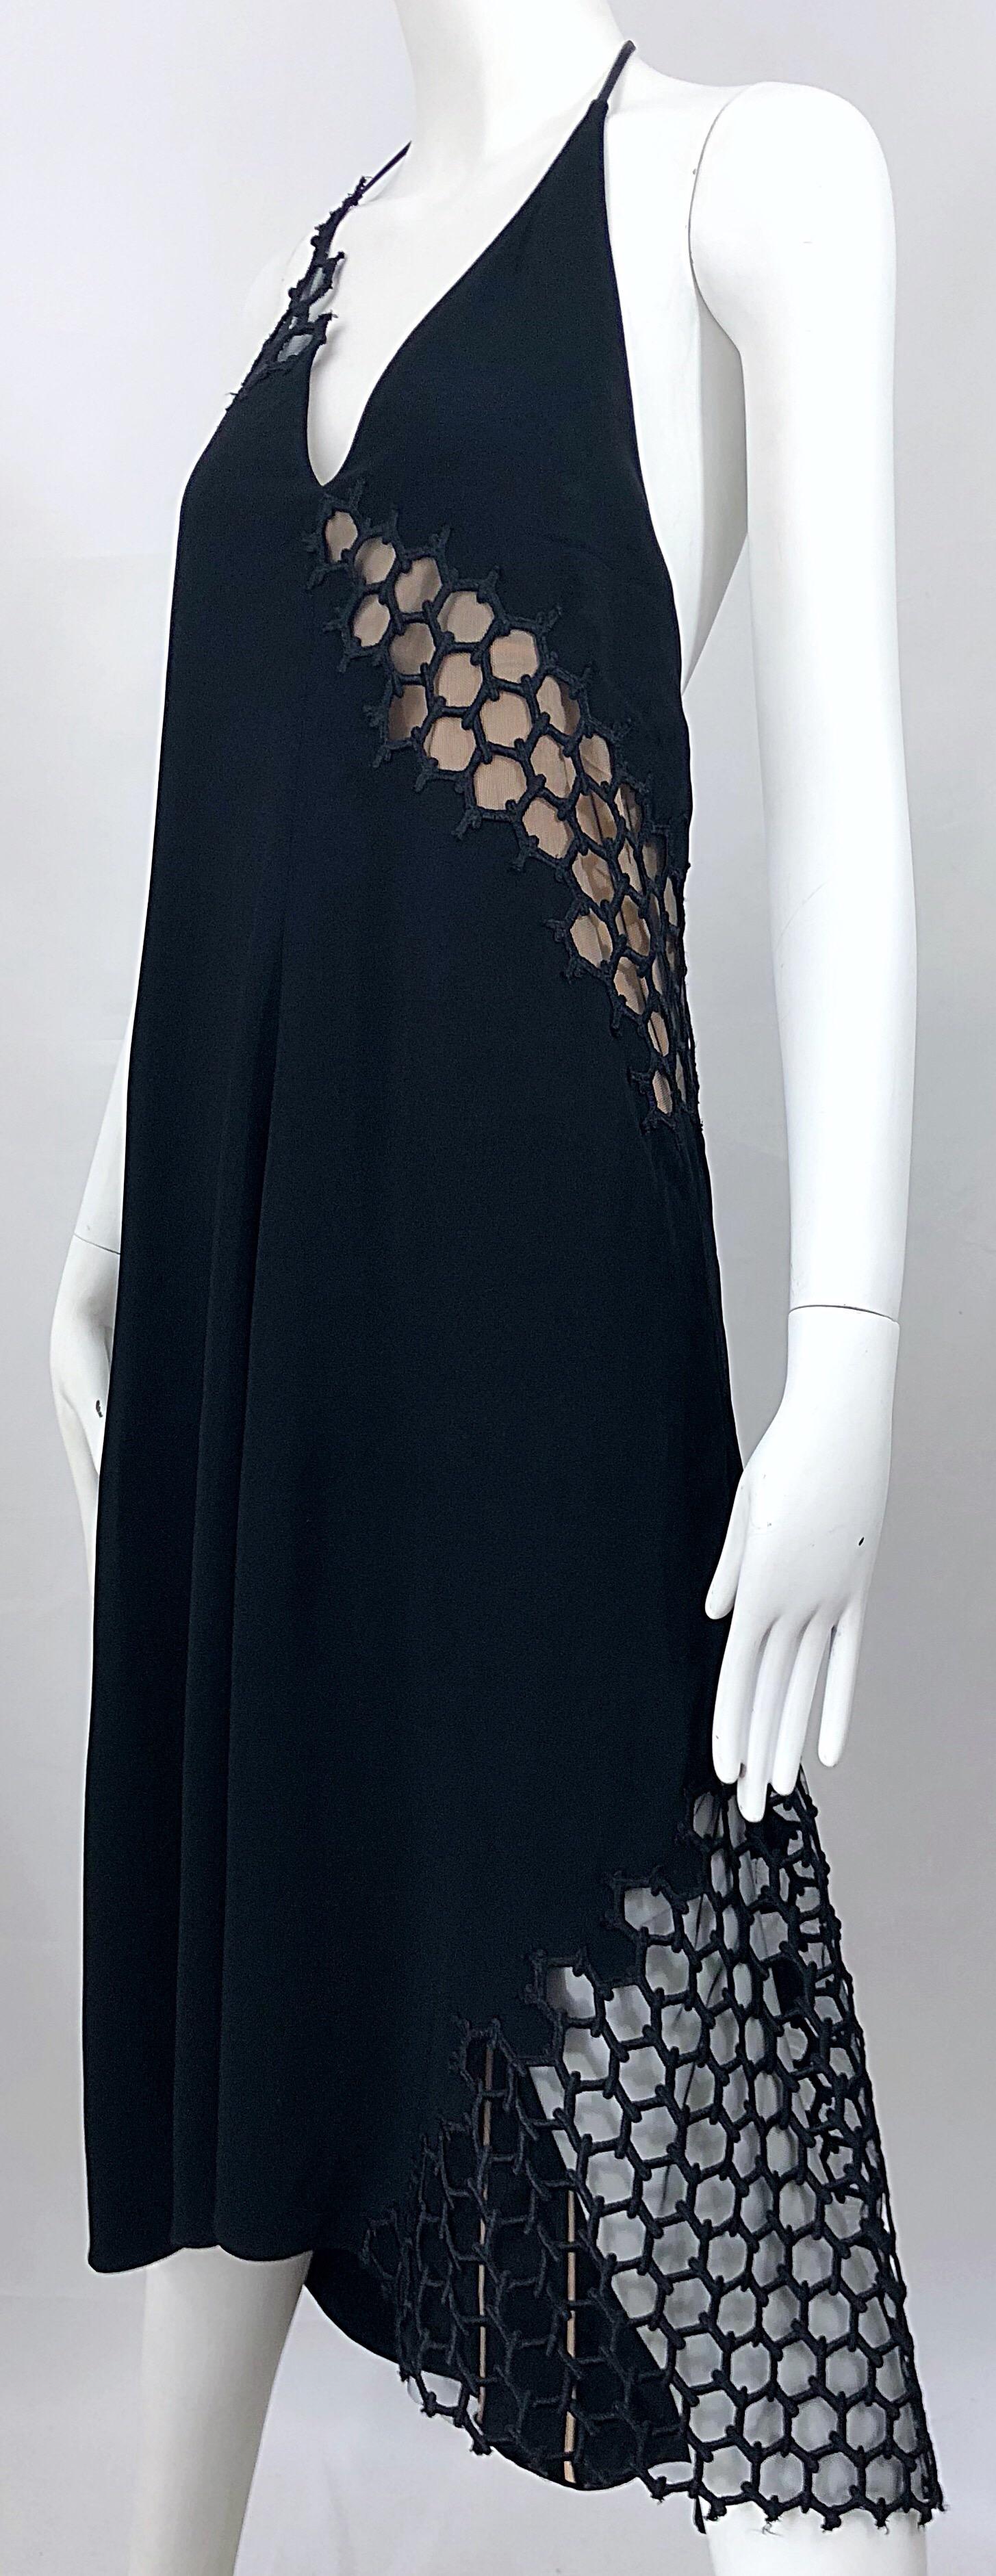 Reed Krakoff Spring 2015 Runway Size 2 / 4 Black Nude Cut Out Halter Dress For Sale 3